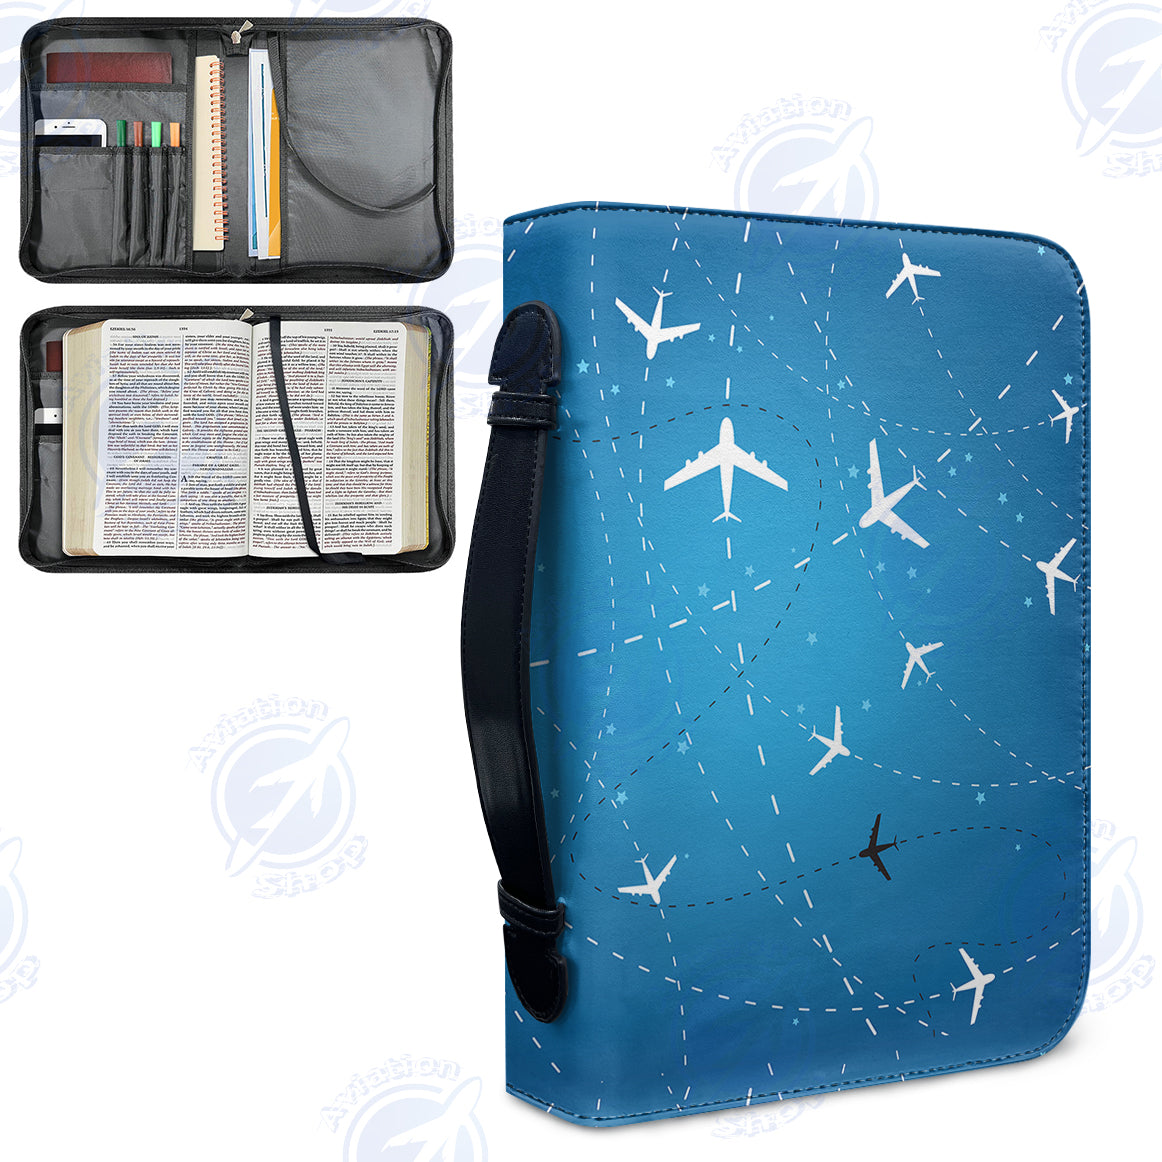 Travelling with Aircraft Designed PU Accessories Bags